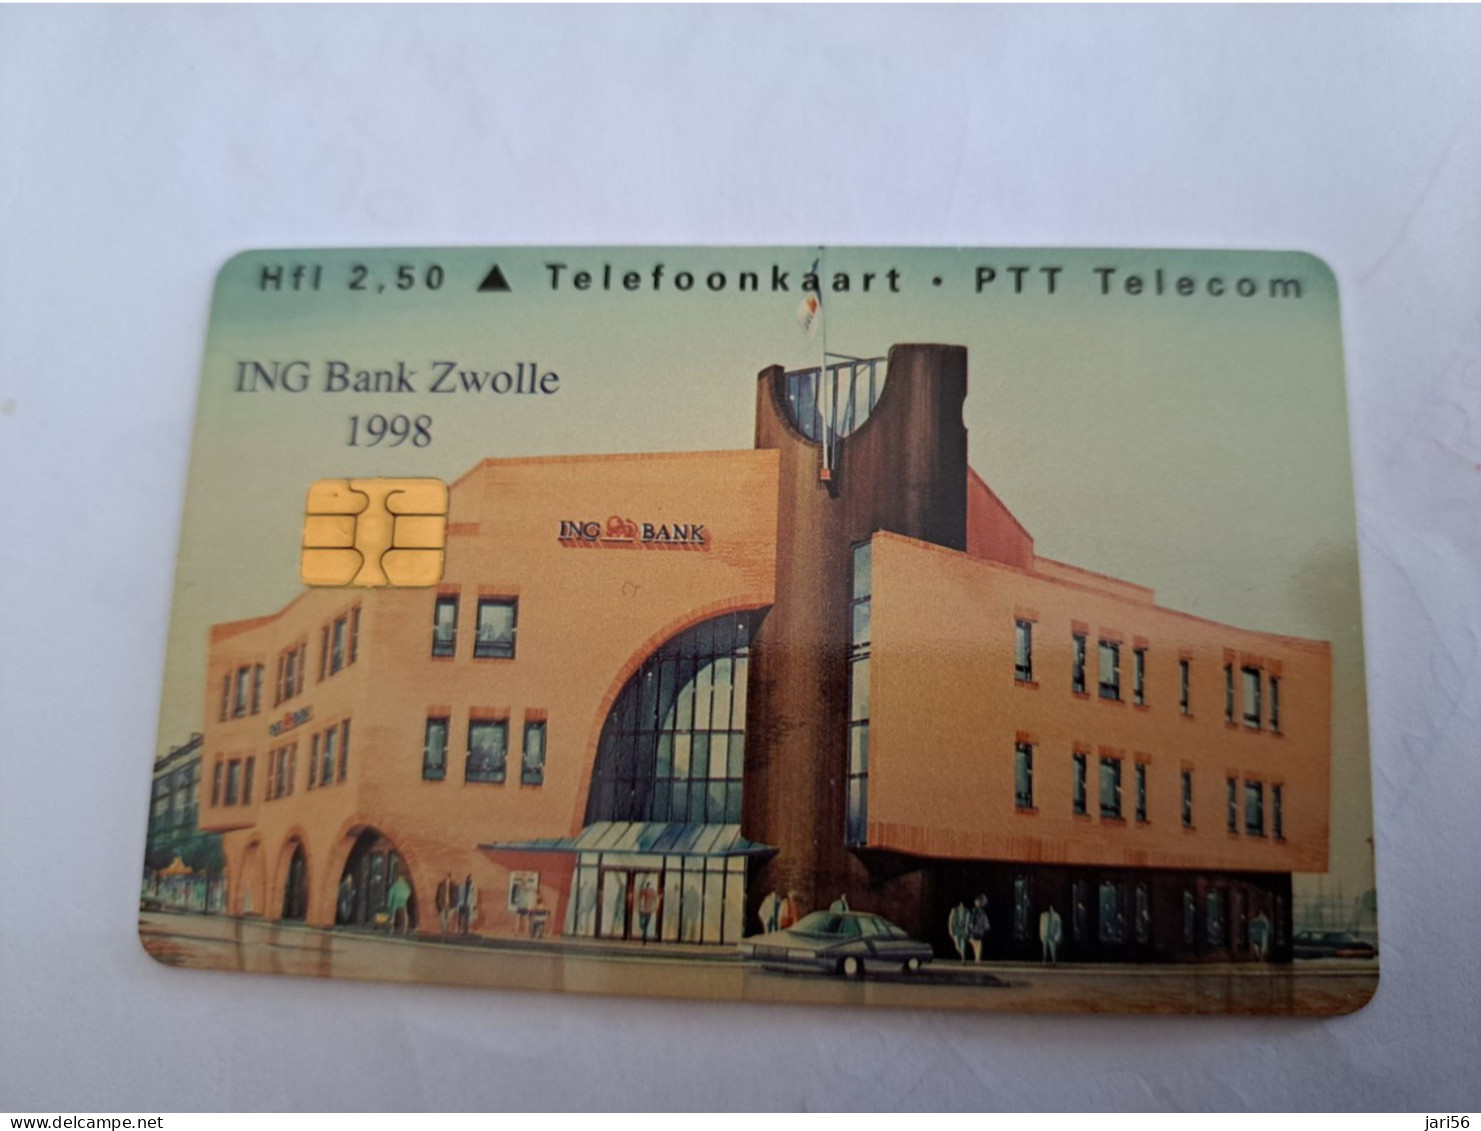 NETHERLANDS / CHIP ADVERTISING CARD/ HFL 2,50/ ING BANK ZWOLLE/ CHIPPER     /  CRD 341   /MINT /   ** 14142** - Privé